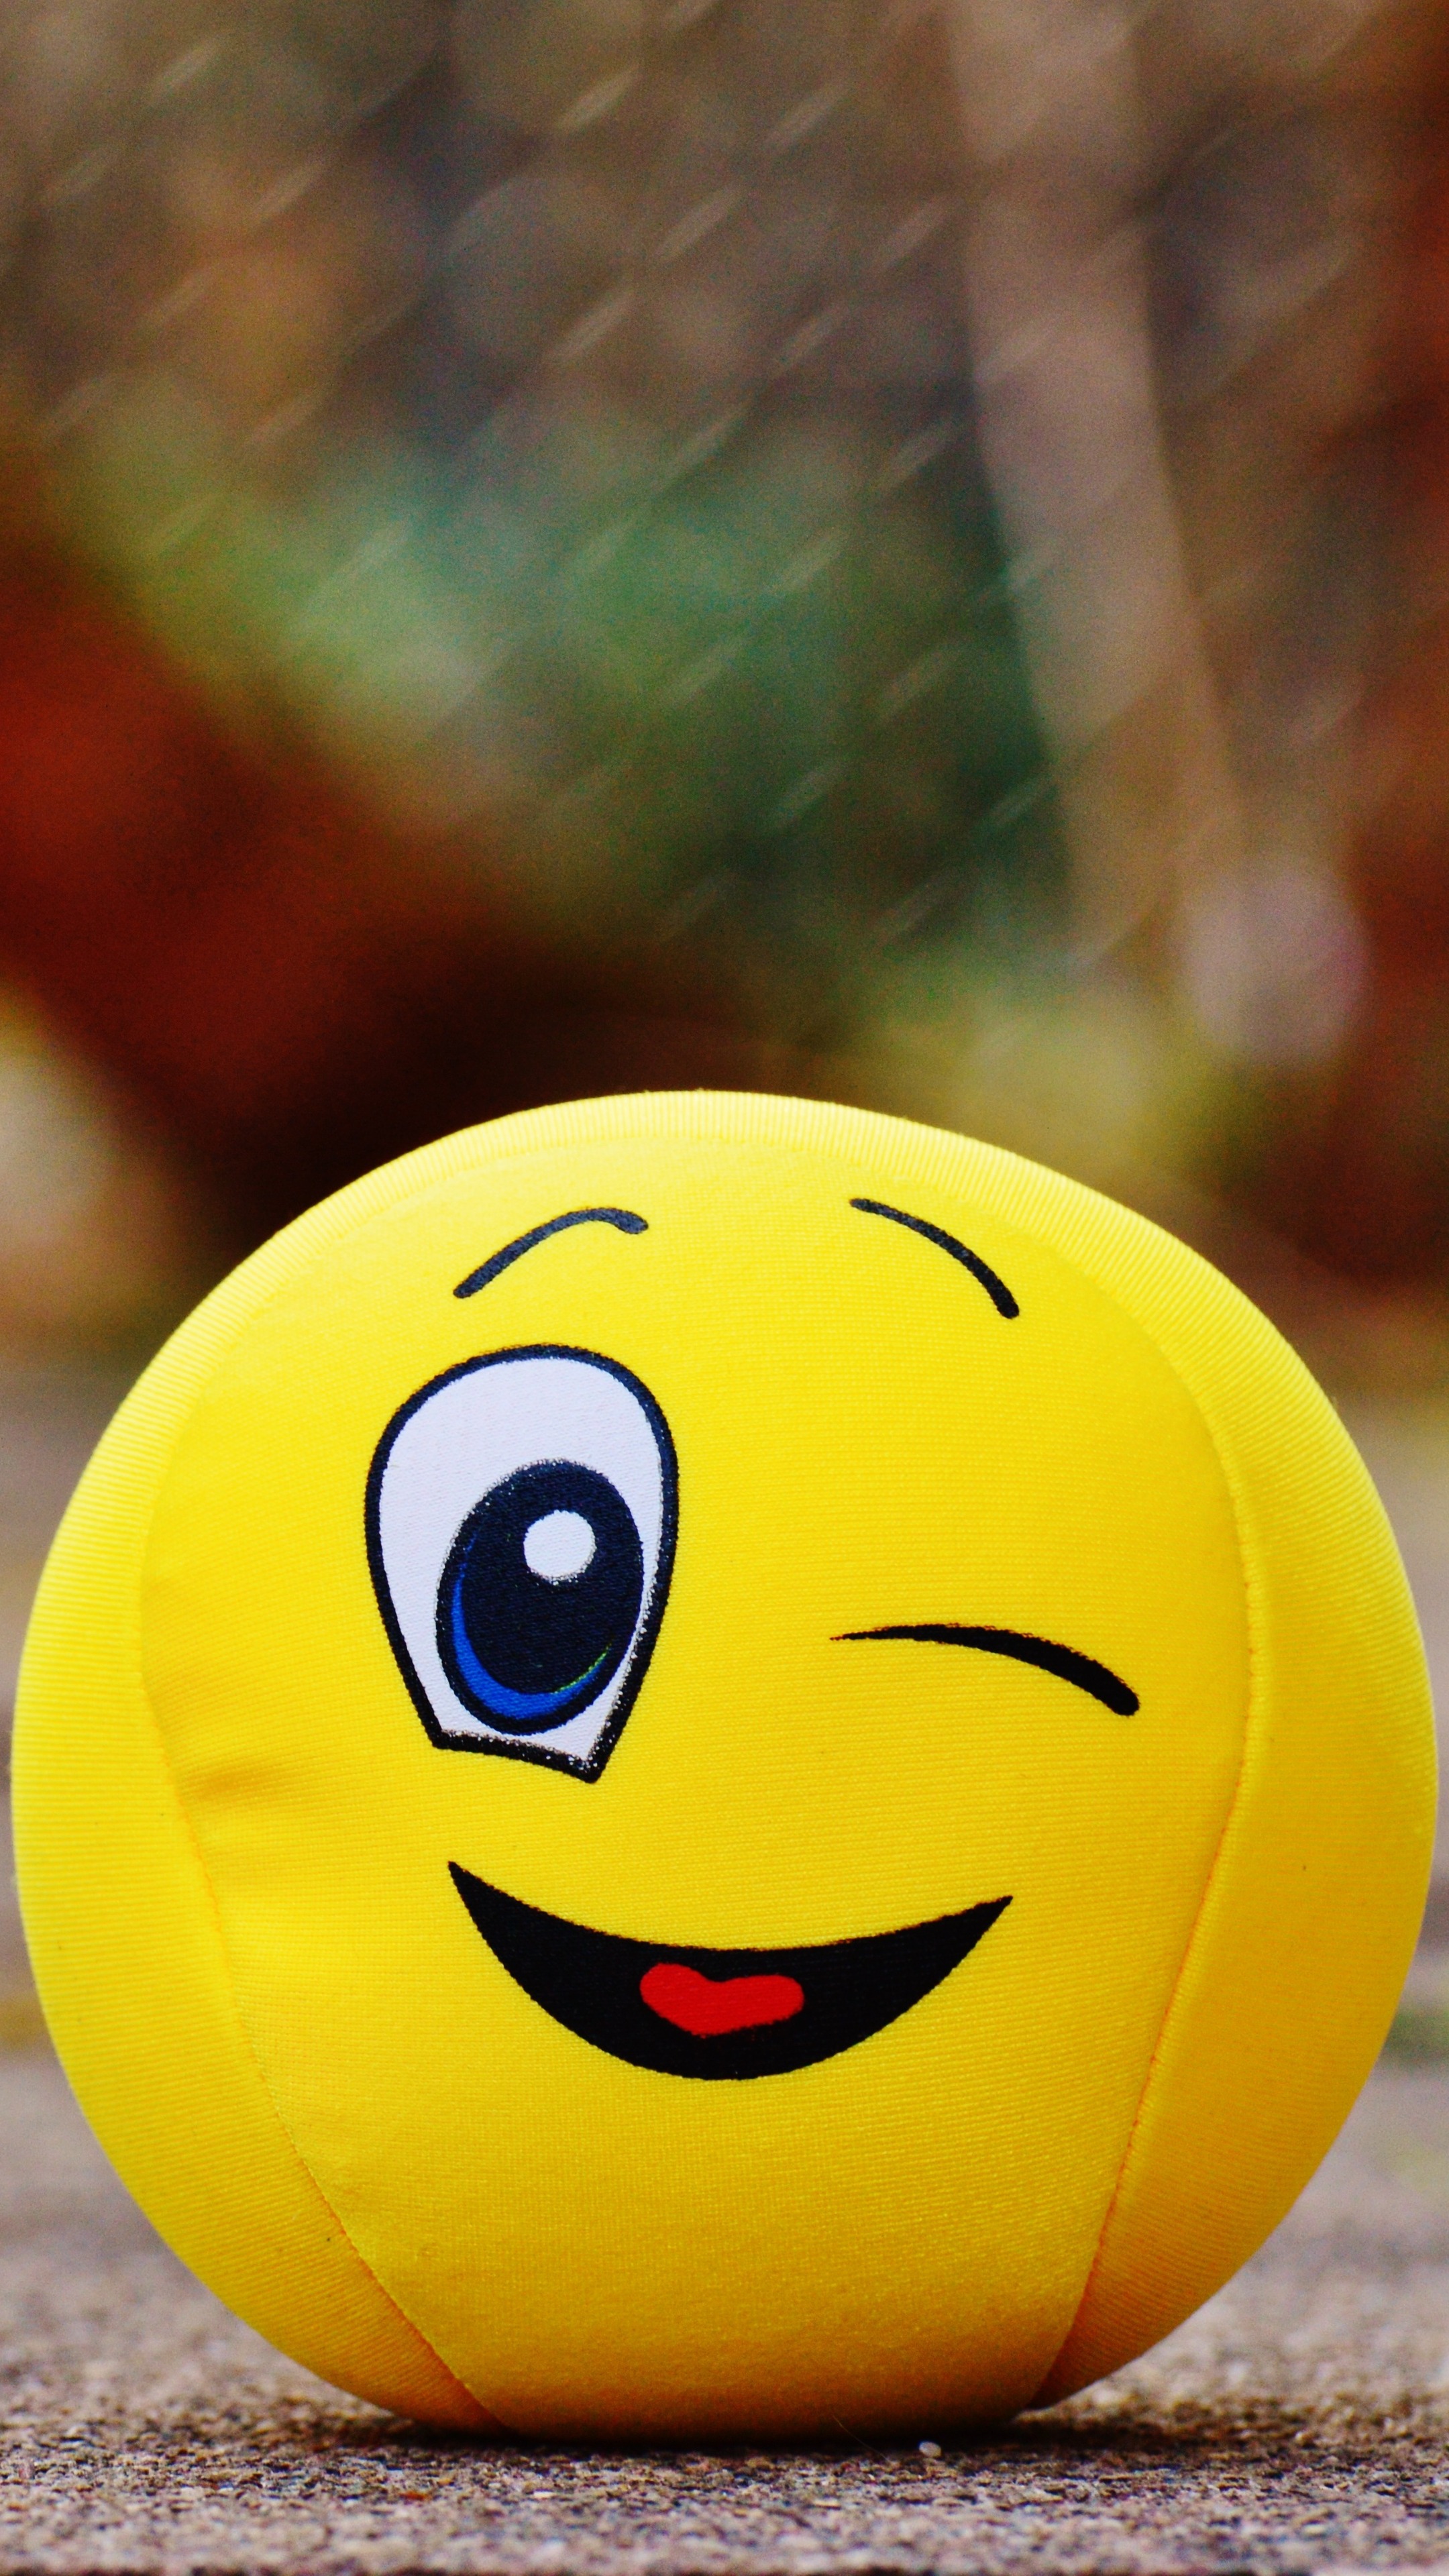 Wallpaper Ball Smile Happy Toy Samsung